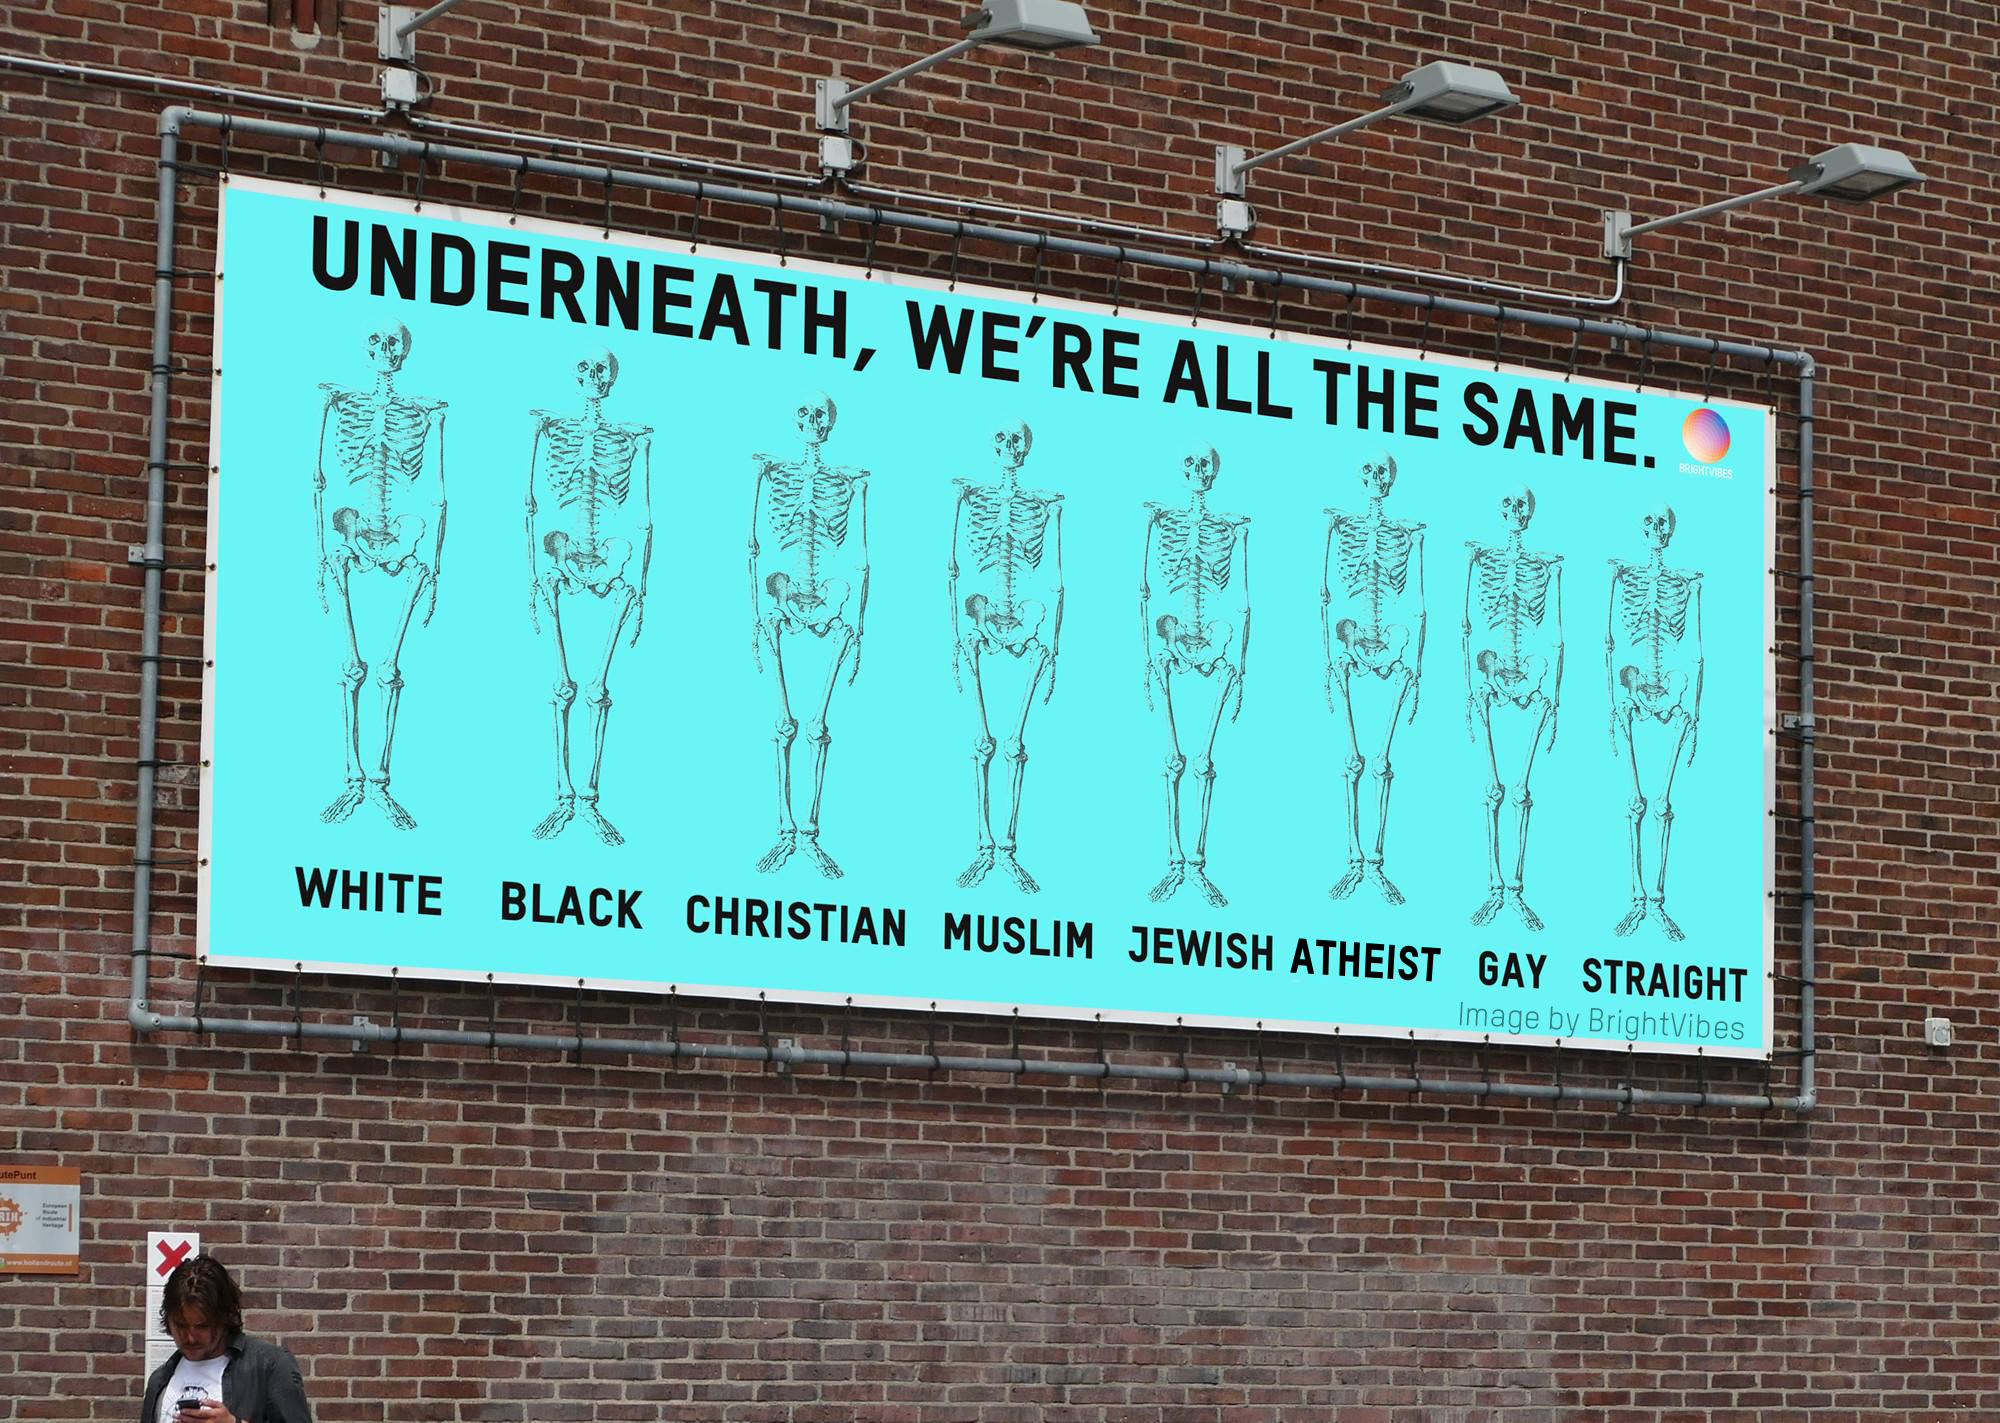 White, black, Christian, Muslim, Jewish, Atheist, Gay or Straight... in the end it makes no difference. We're all part of one race... the human race.